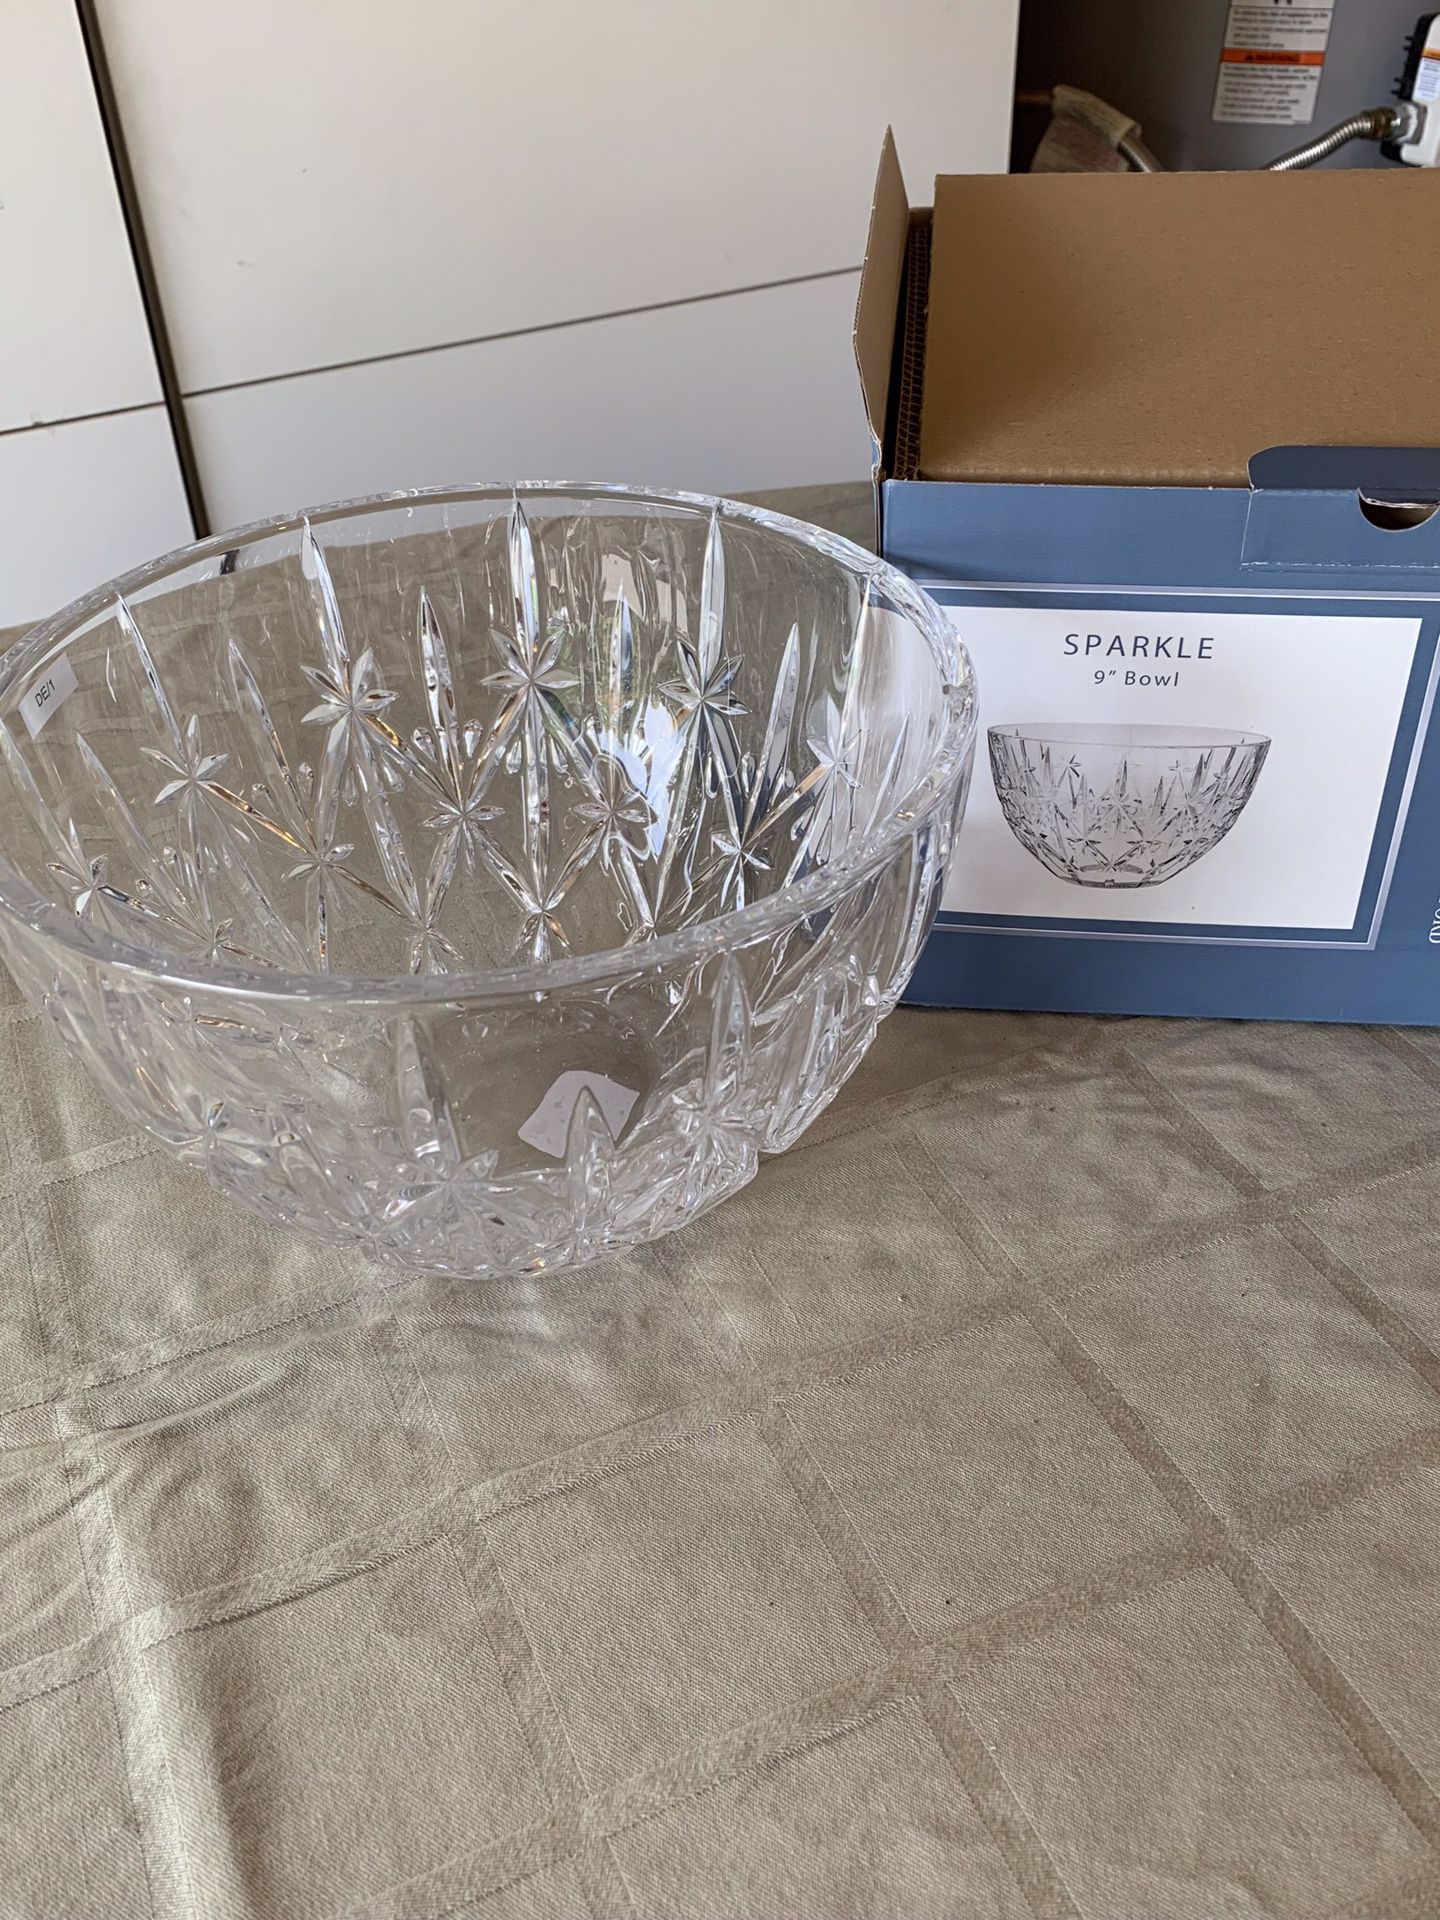 New Marquis by Waterford 9inch Sparkle Bowl.